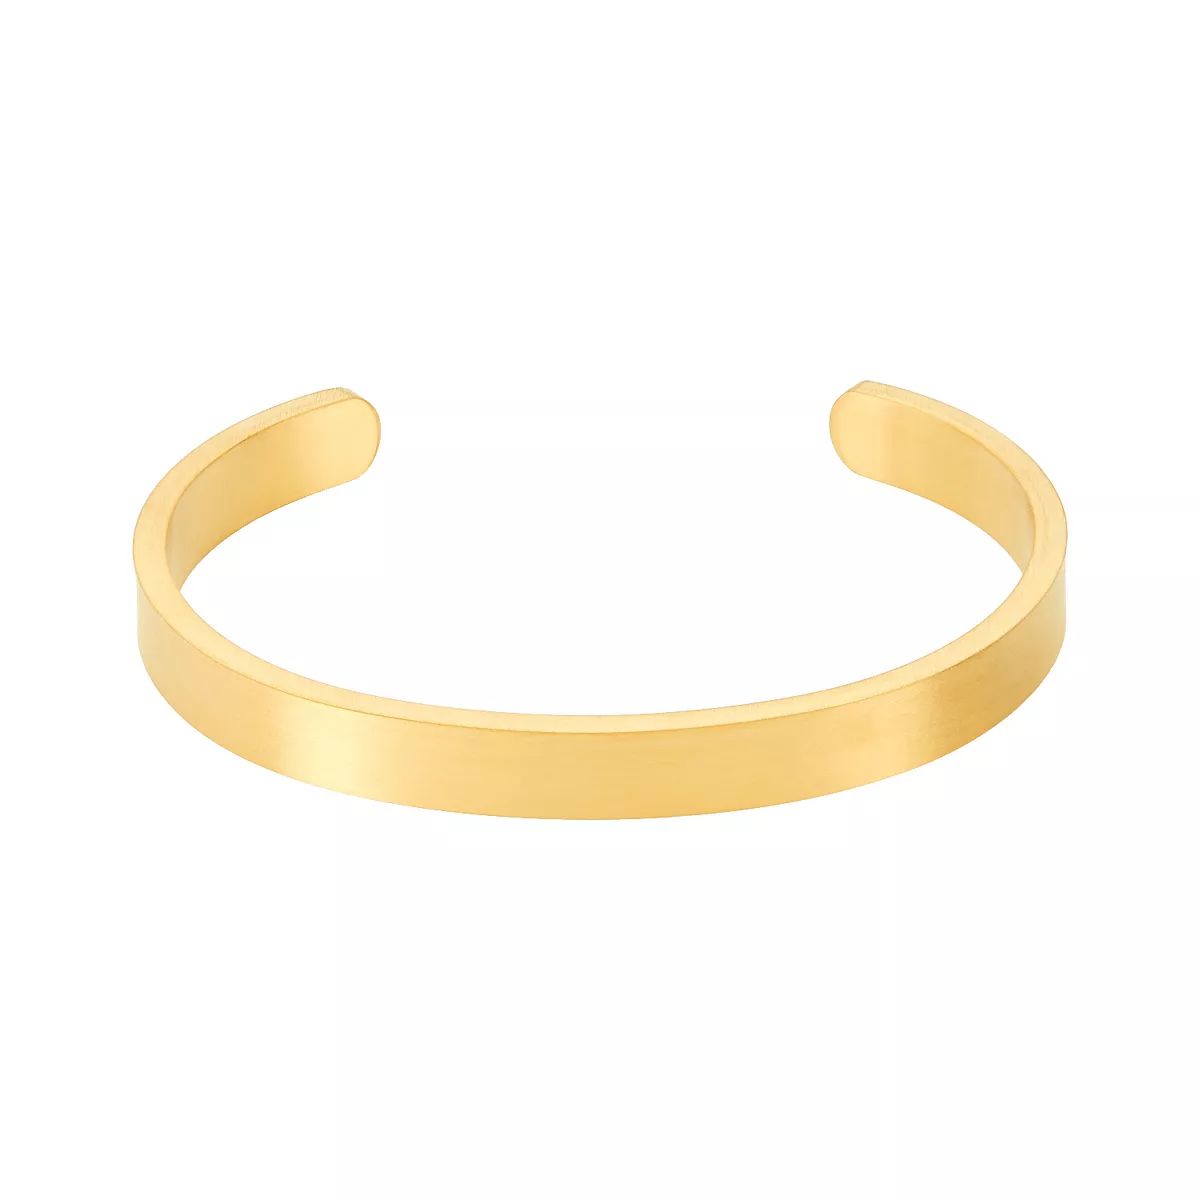 Adornia 14k Gold Plated Stainless Steel Cuff Bracelet | Kohl's